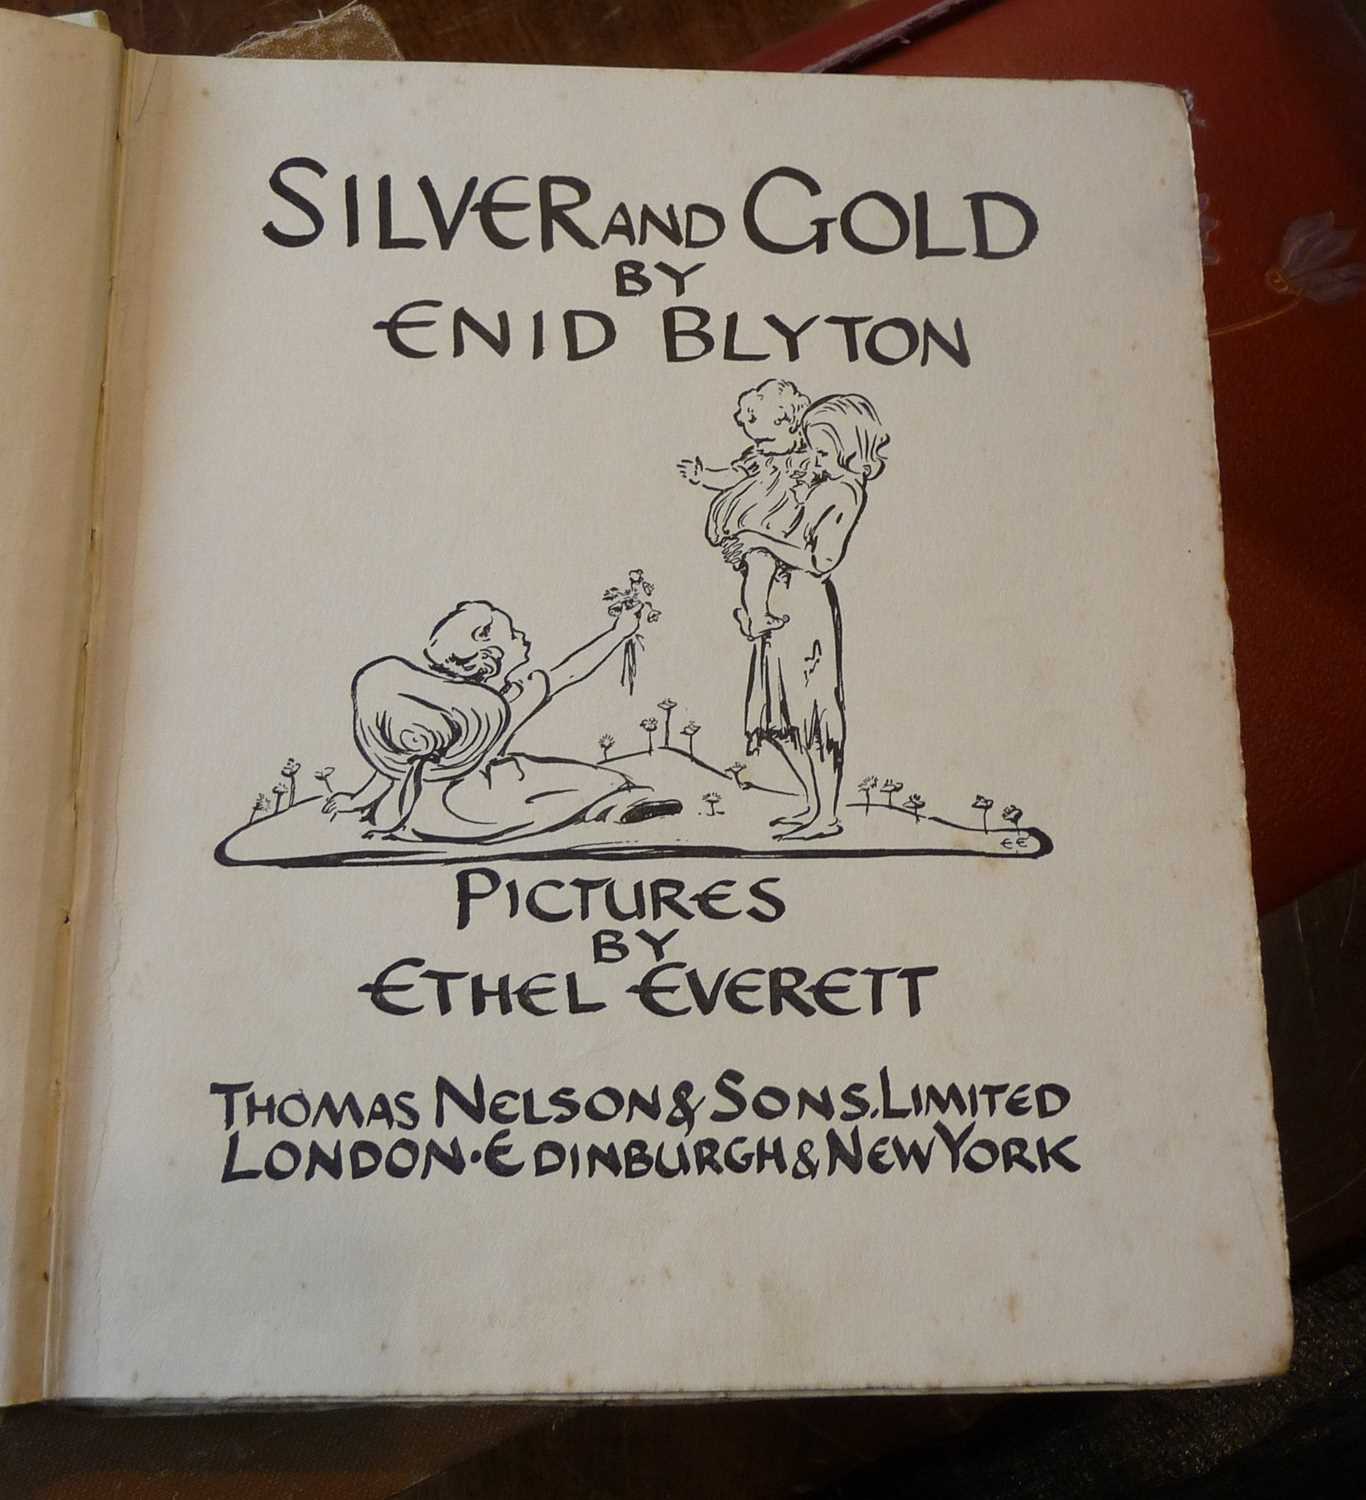 'Silver and Gold' by Enid Blyton, 1927/8 with pictures by Ethel Everett, uncut edges, pub. by Thomas - Image 3 of 3